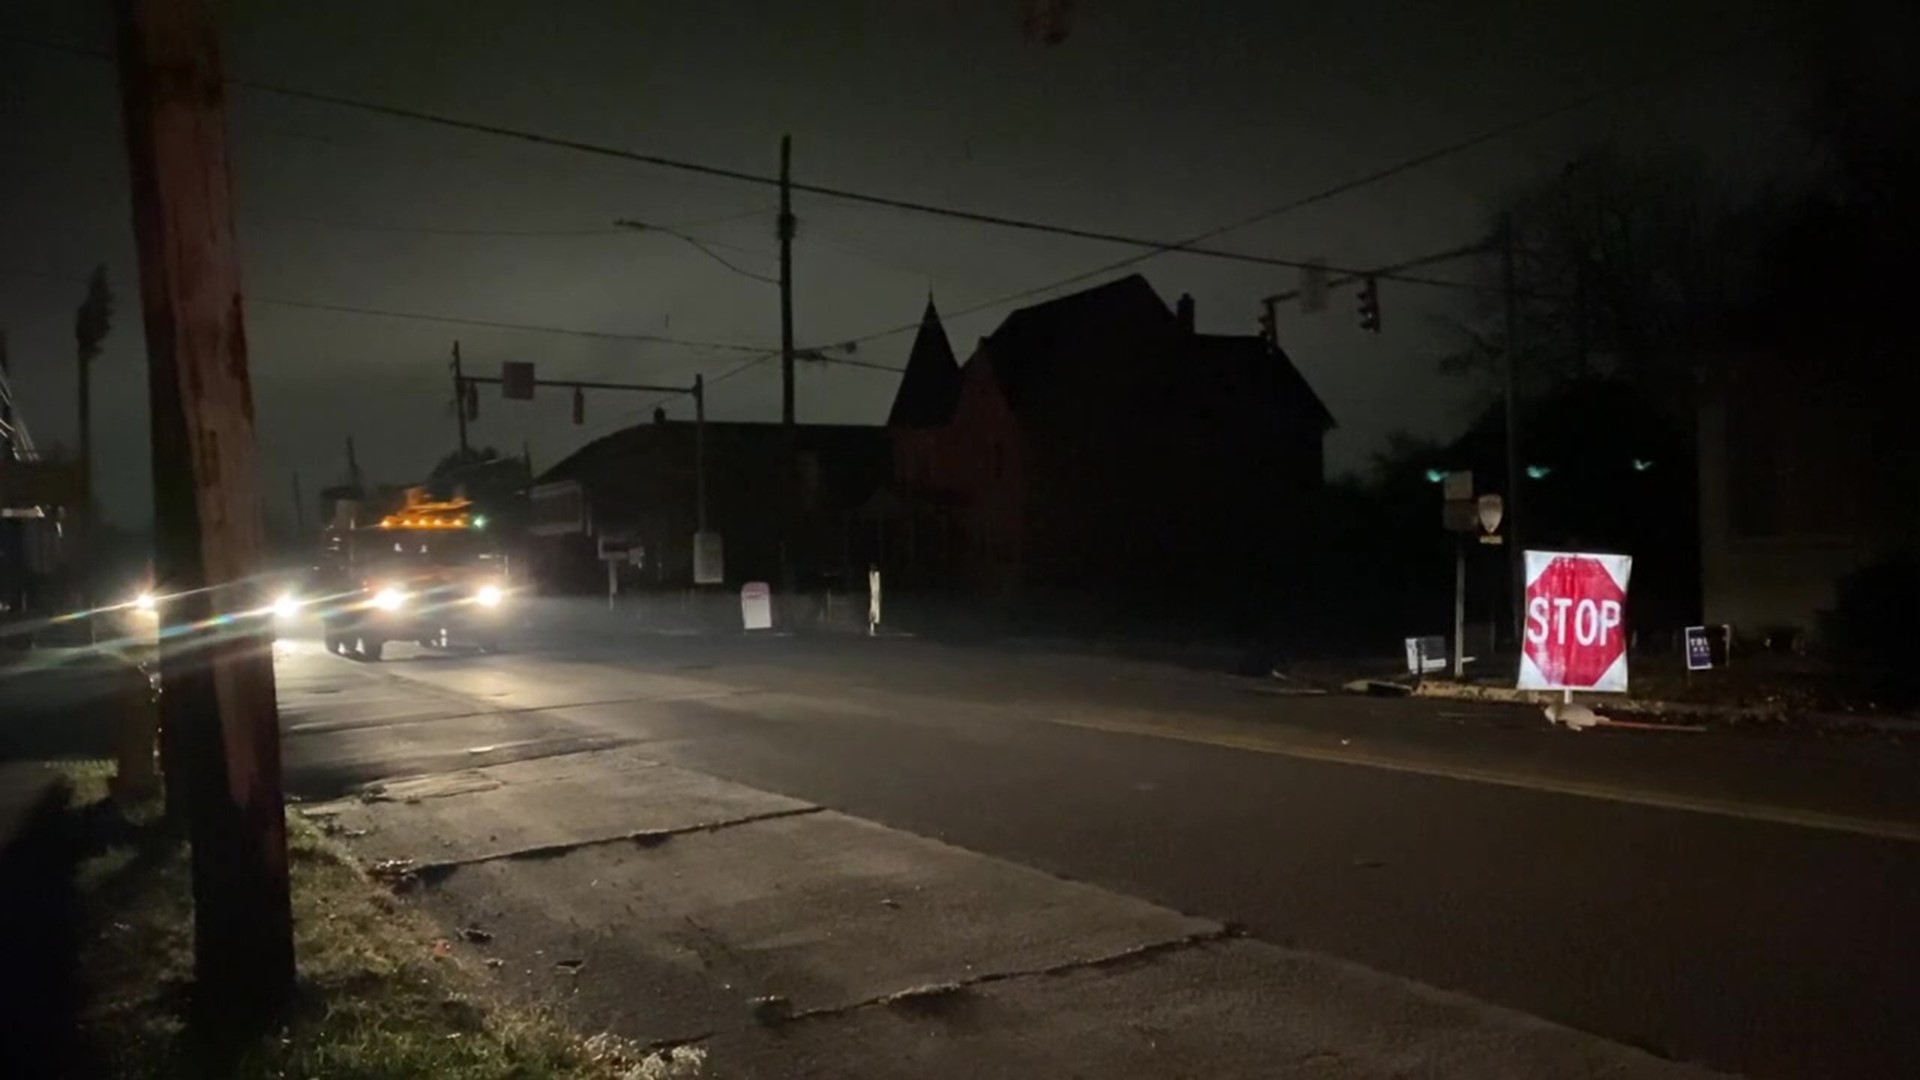 People in Nescopeck say they lost power around 1 p.m.